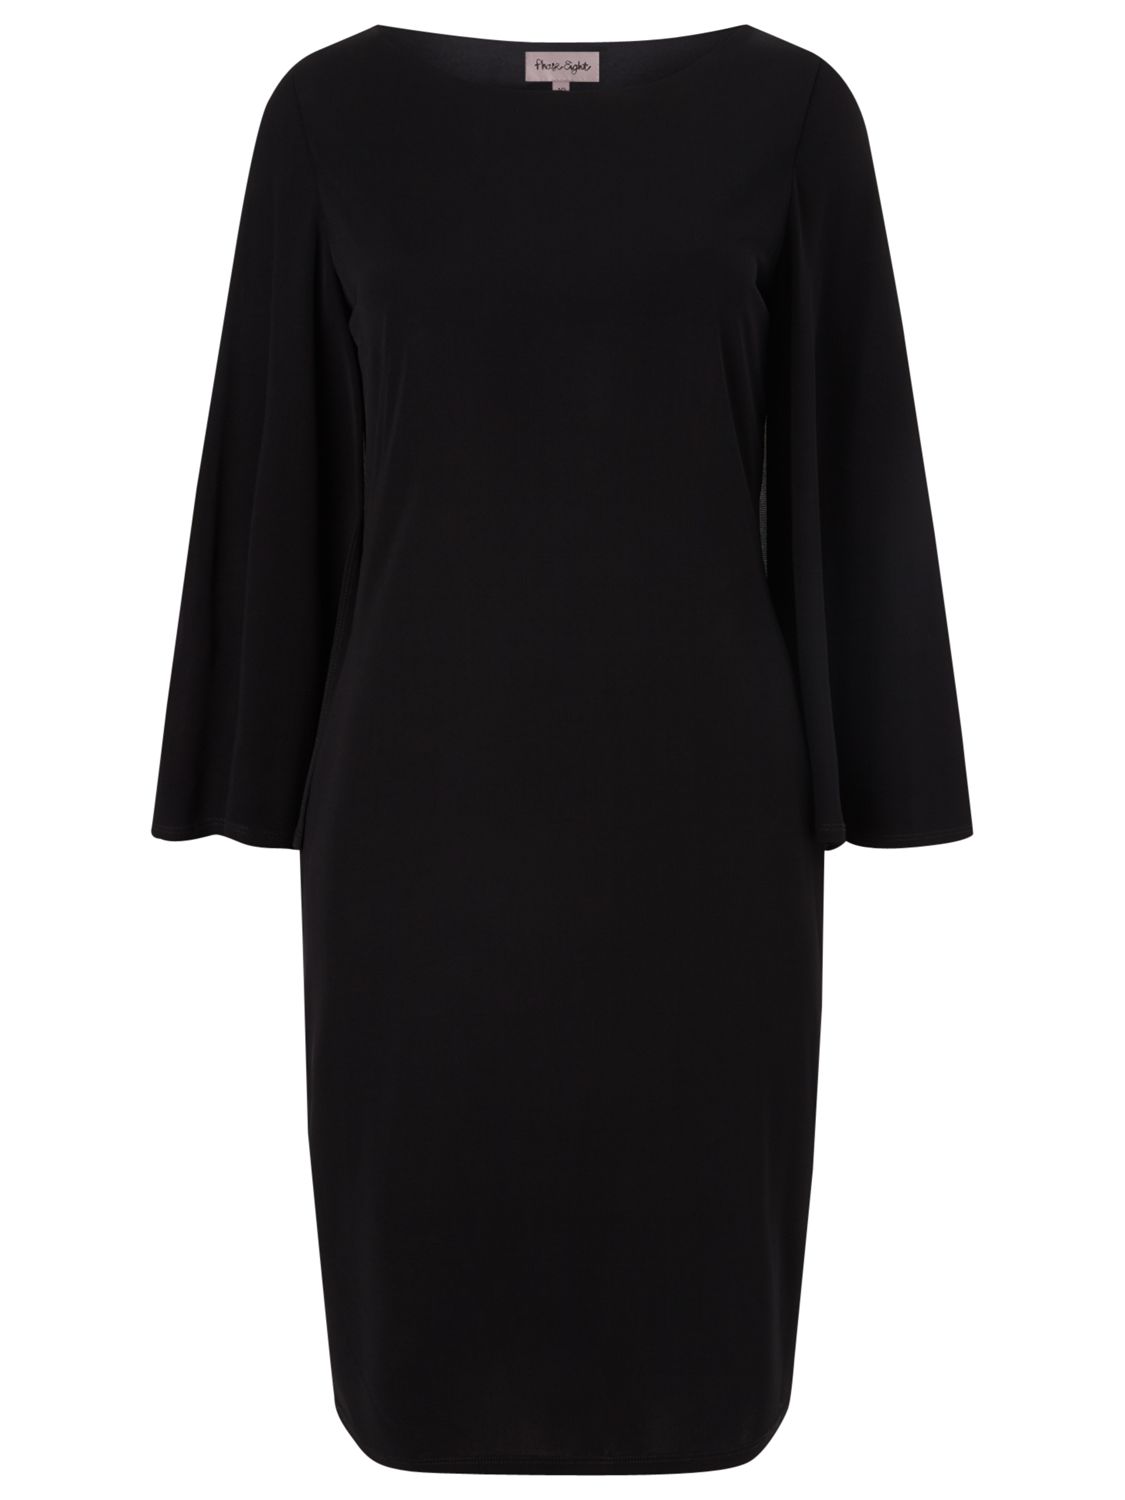 Phase Eight Christabel Cape Dress, Black at John Lewis & Partners